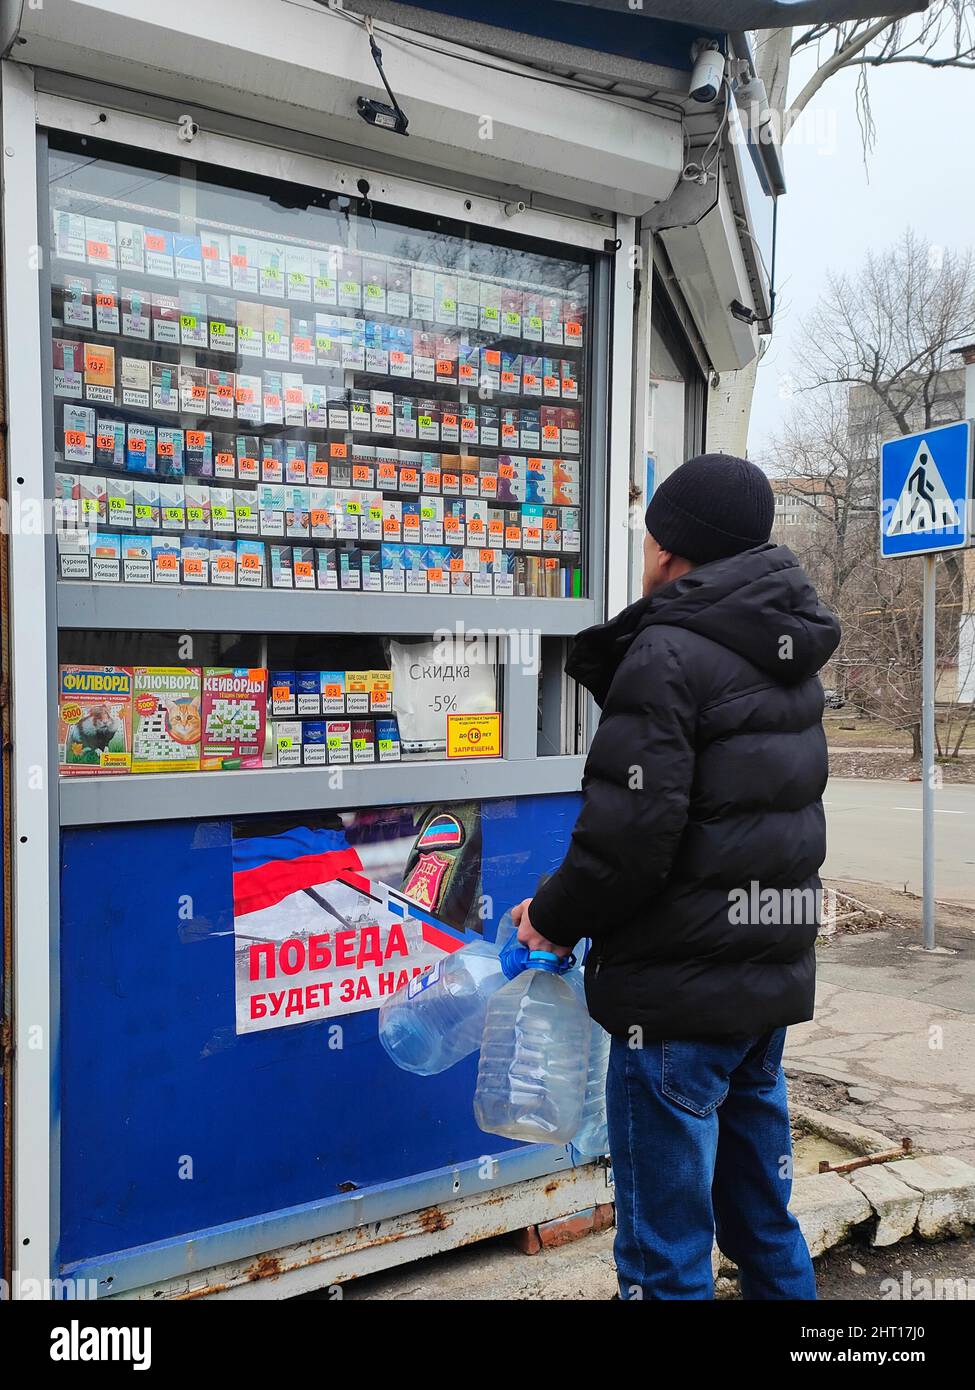 Donetsk. 26th Feb, 2022. A man stands in front of a shop in Donetsk, Feb. 26, 2022. Credit: Xinhua/Alamy Live News Stock Photo